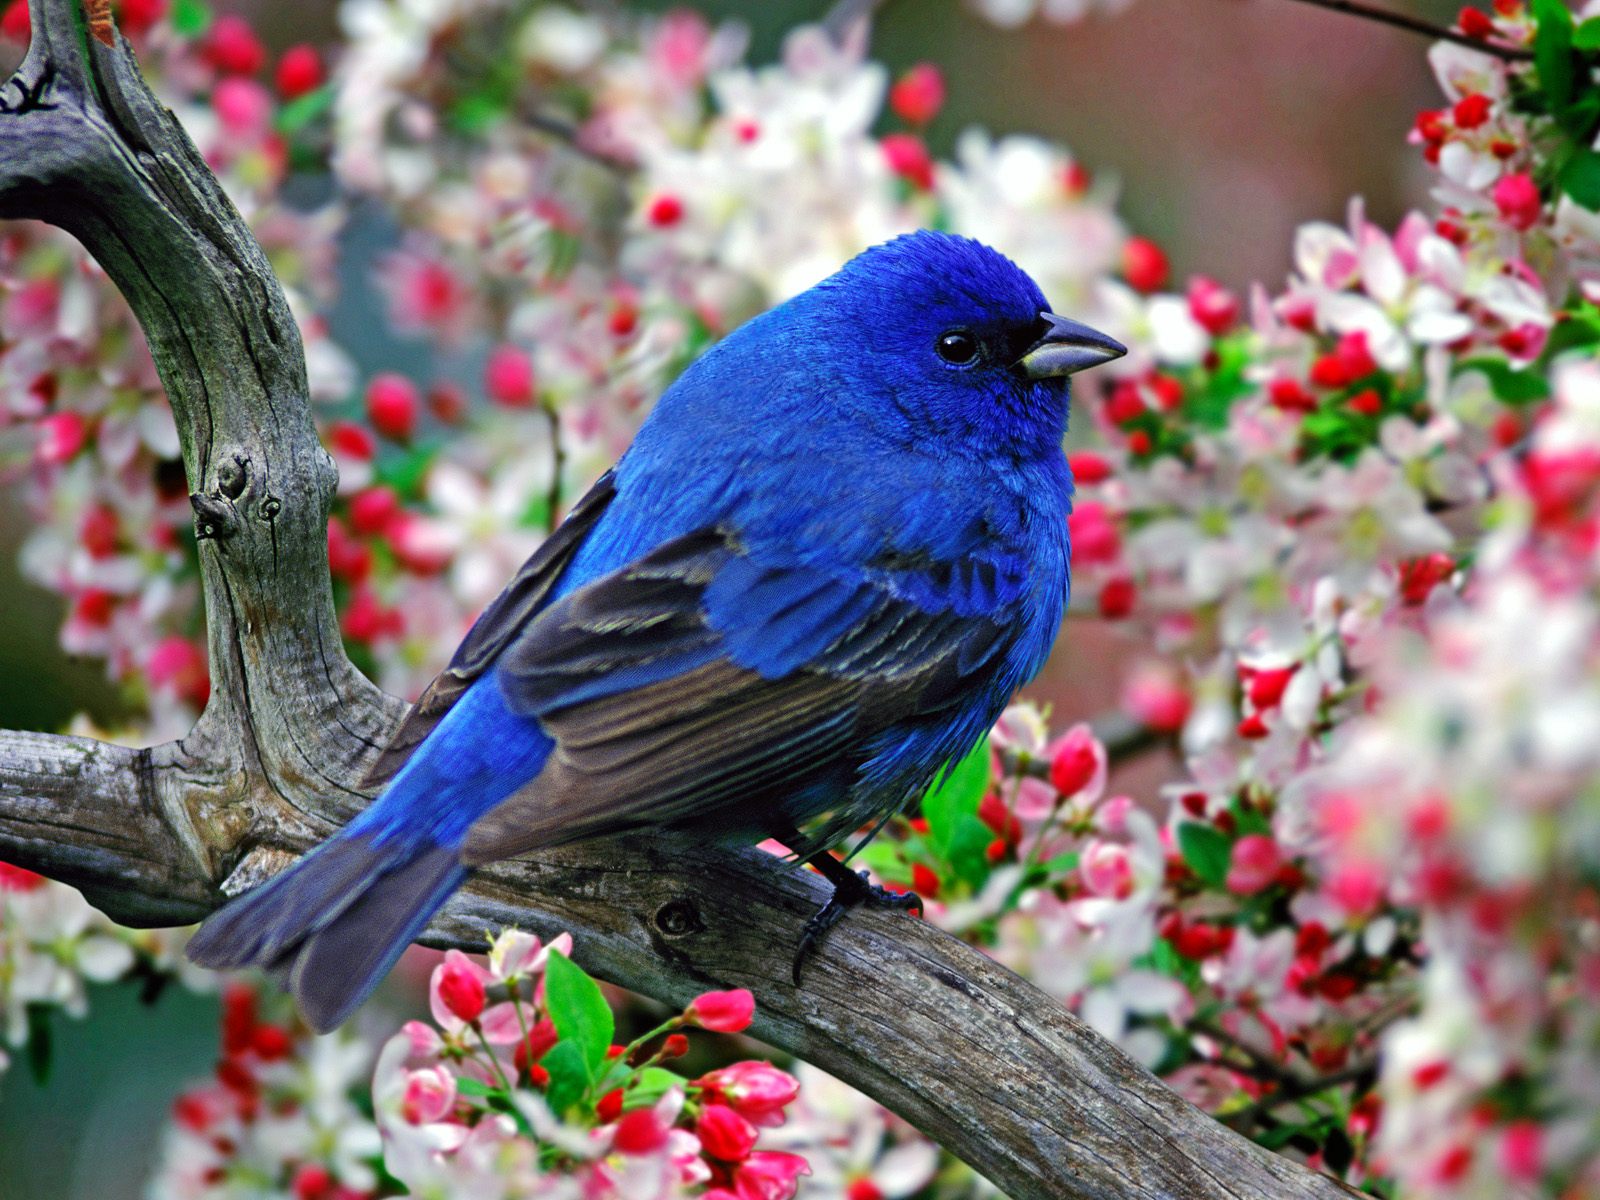 types of flowers england National Geographic Blue Birds | 1600 x 1200